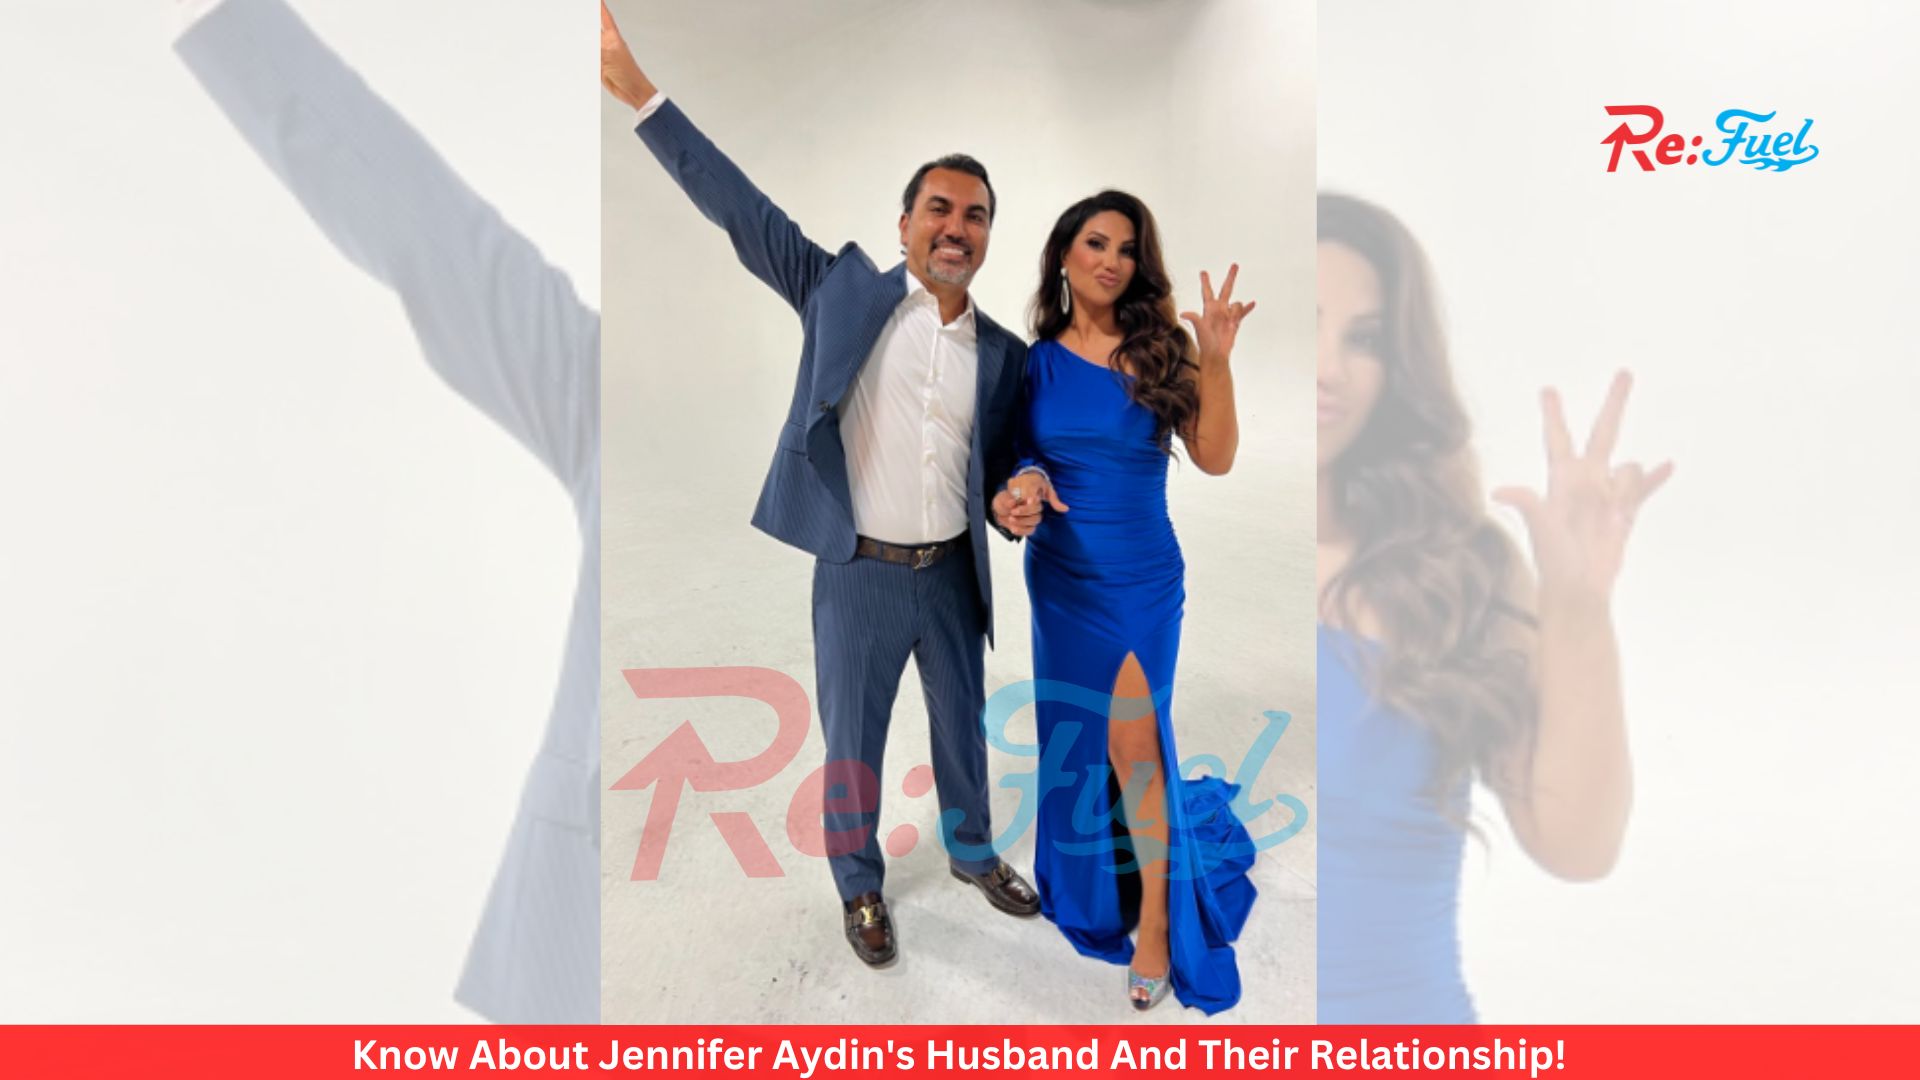 Know About Jennifer Aydin's Husband And Their Relationship!